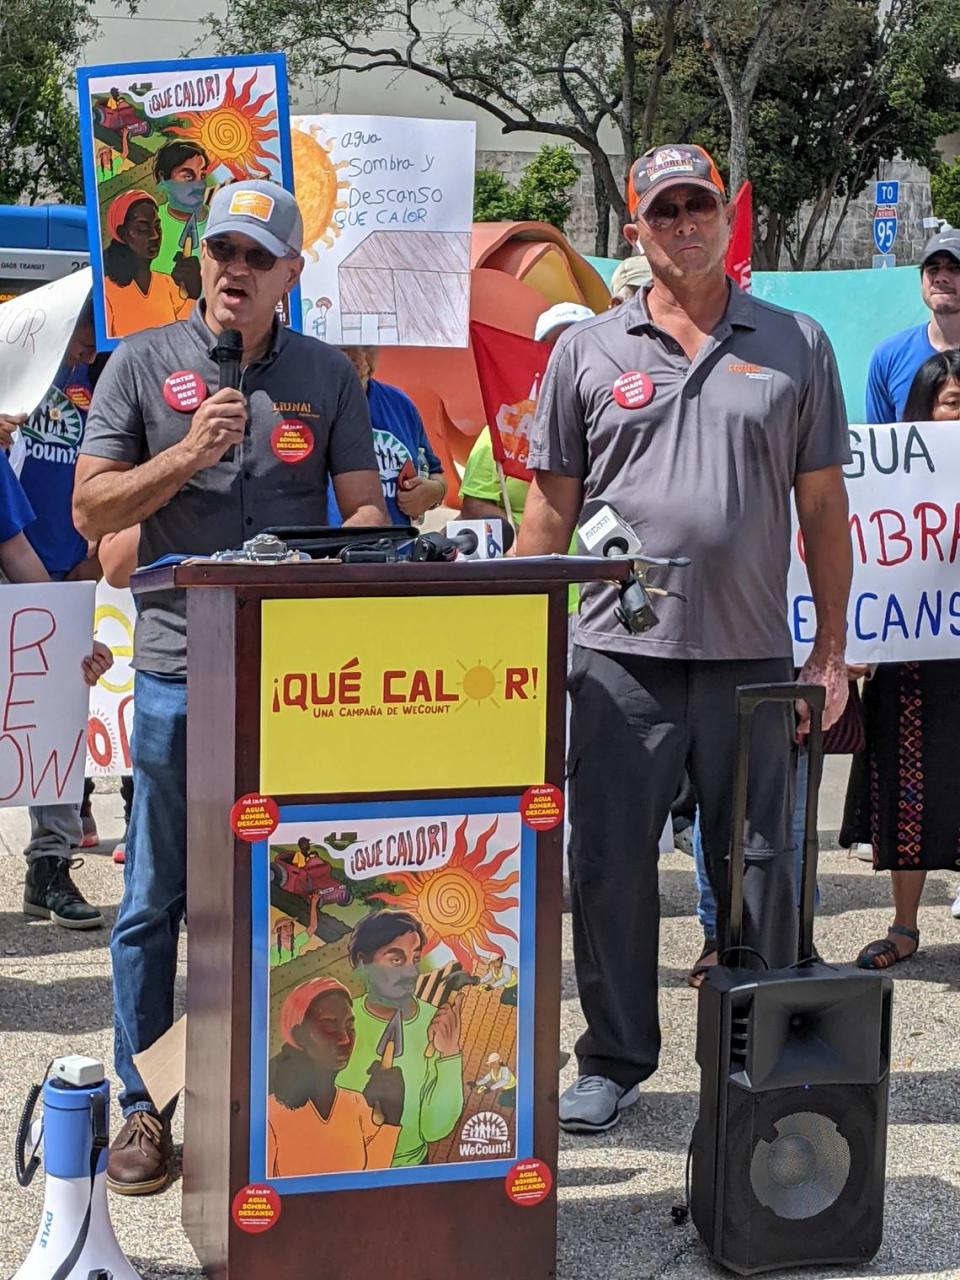 Richard Quincoces, an organizer for Laborers International Union of North America, which represents construction workers, speaks at a June 21, 2023 rally calling on Miami-Dade County to create heat protections for outdoor workers.